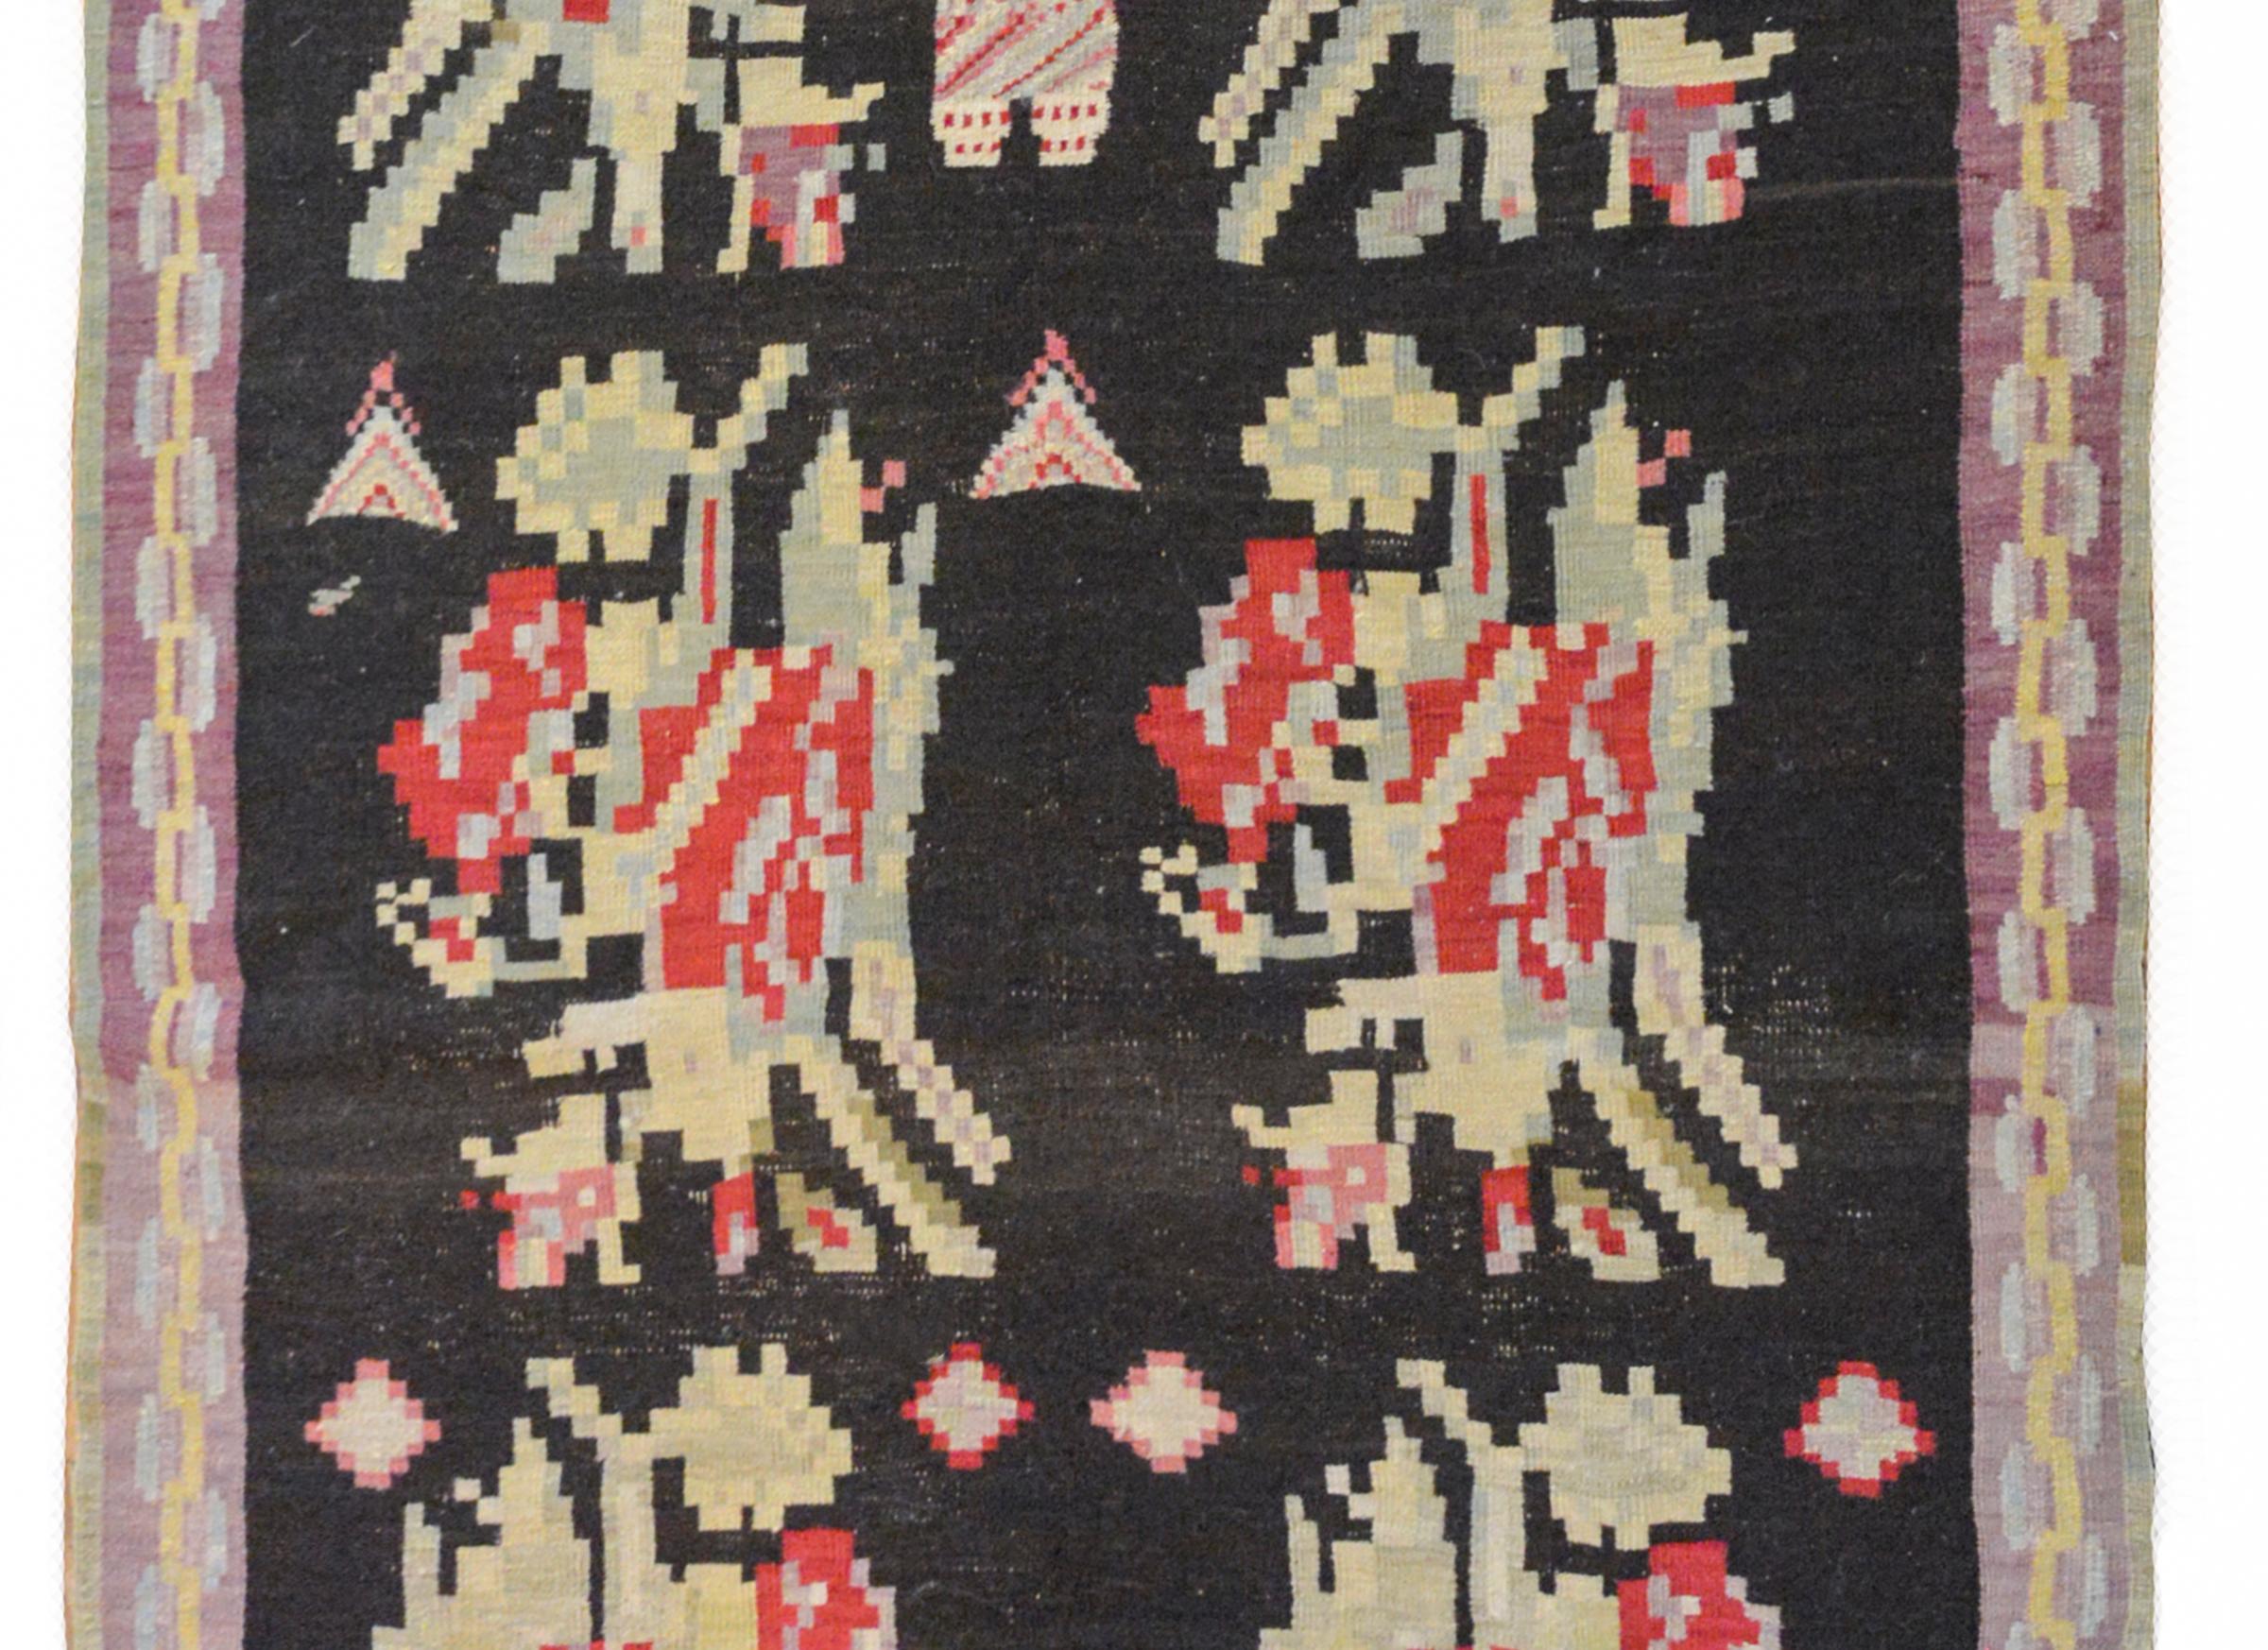 A wonderful early 20th century Turkish Bessarabian Kilim rug with ten stylized floral medallions woven in crimson, pink, pale indigo, pale green, and yellow against a black ground, and surrounded by a geometric pattered border.